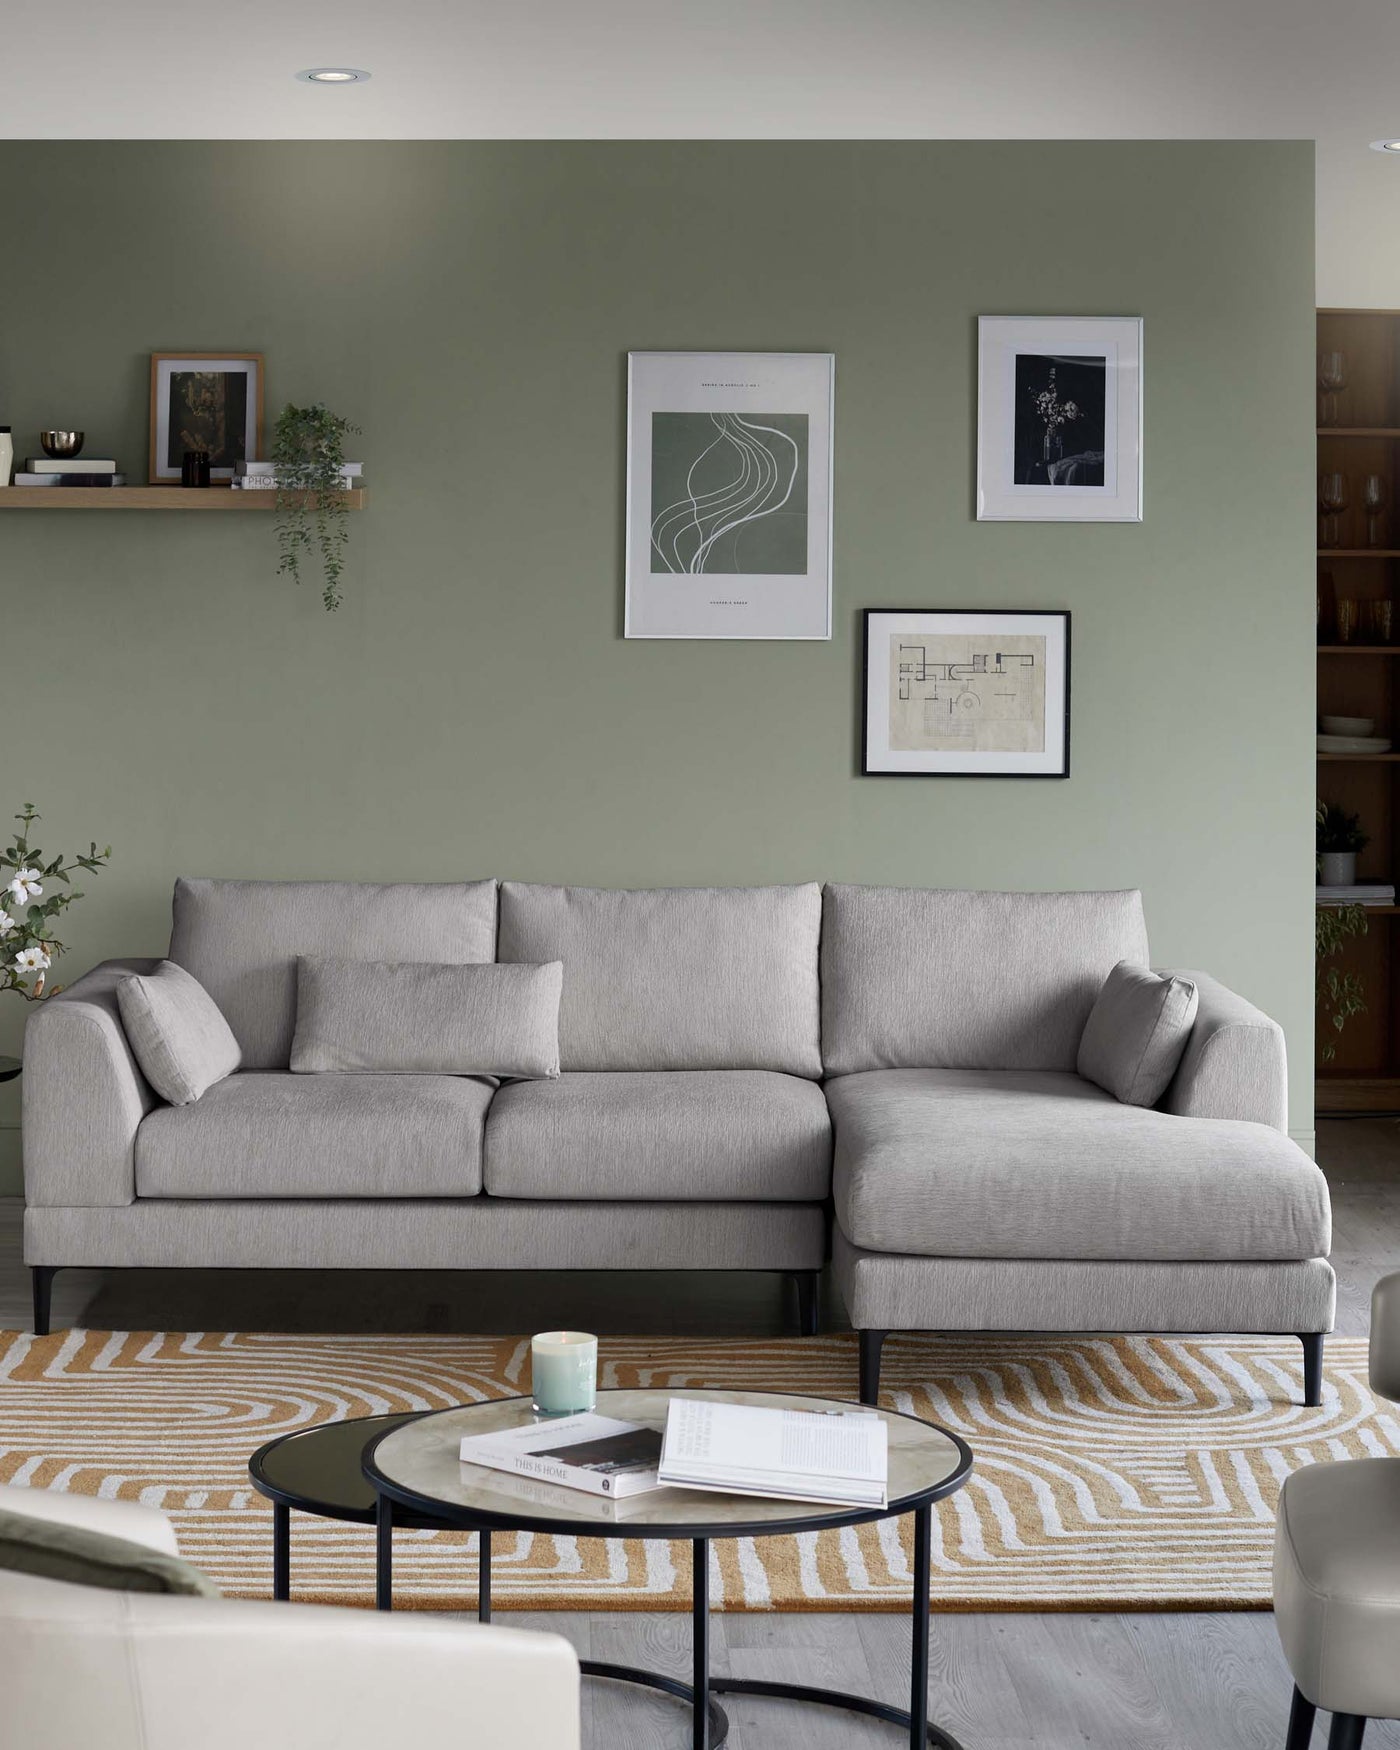 Modern minimalist living room featuring a light grey upholstered L-shaped sectional sofa with five back cushions and a chaise lounge end. In front of the sofa, there is a round black coffee table with a glass top. The furniture is placed on a beige area rug with geometric patterns.